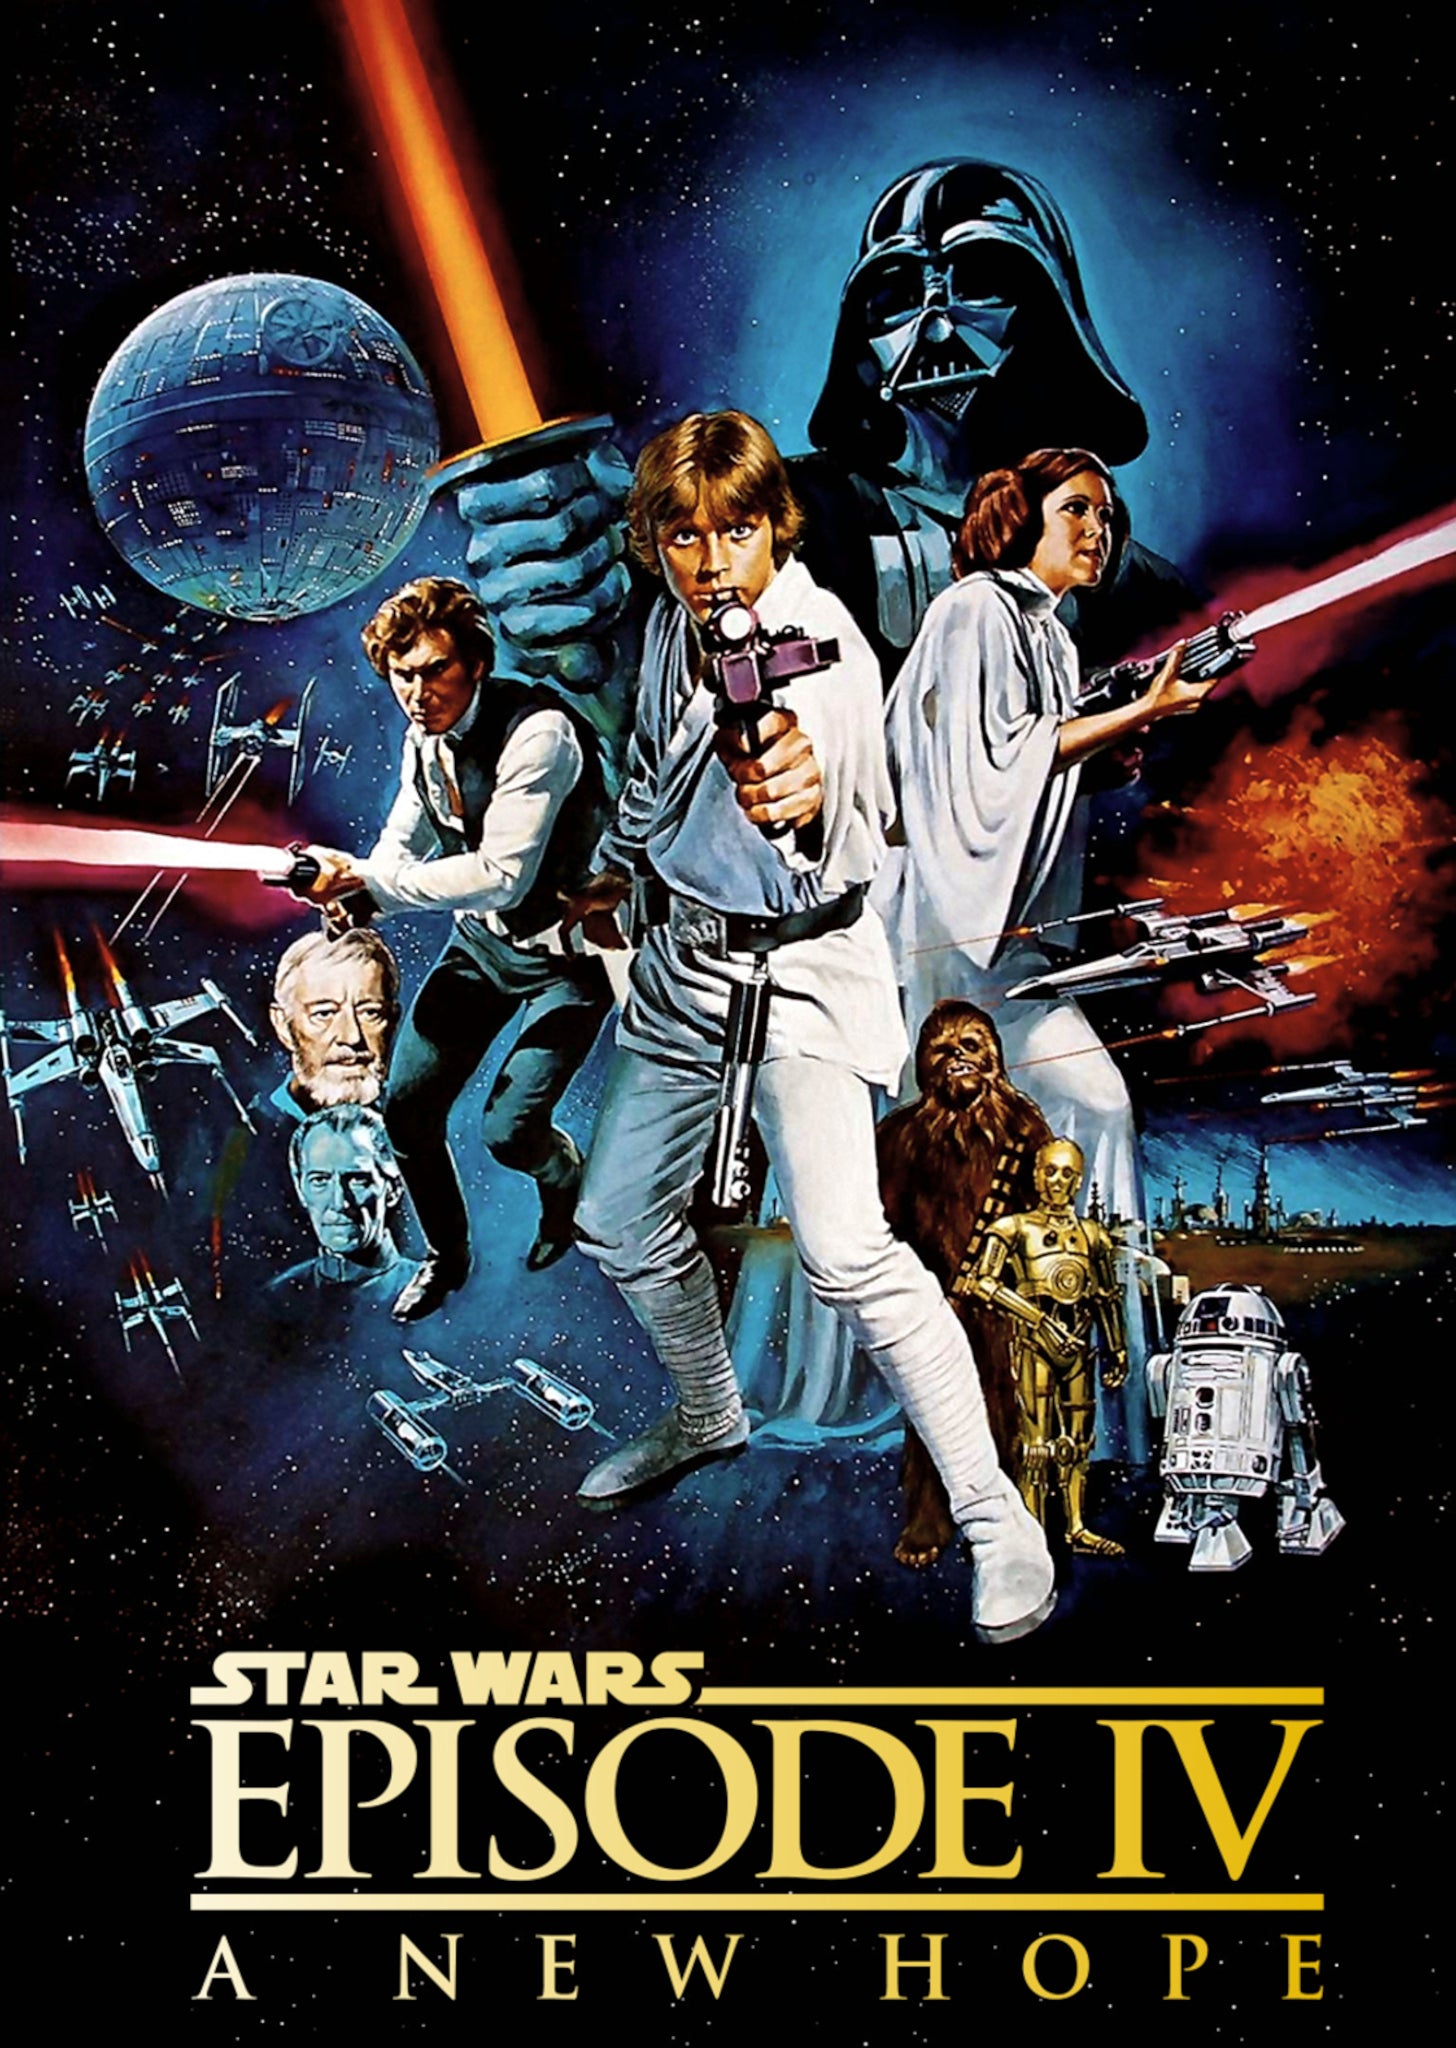 Star Wars - Episode IV - A New Hope - A4 Mini Print/Poster